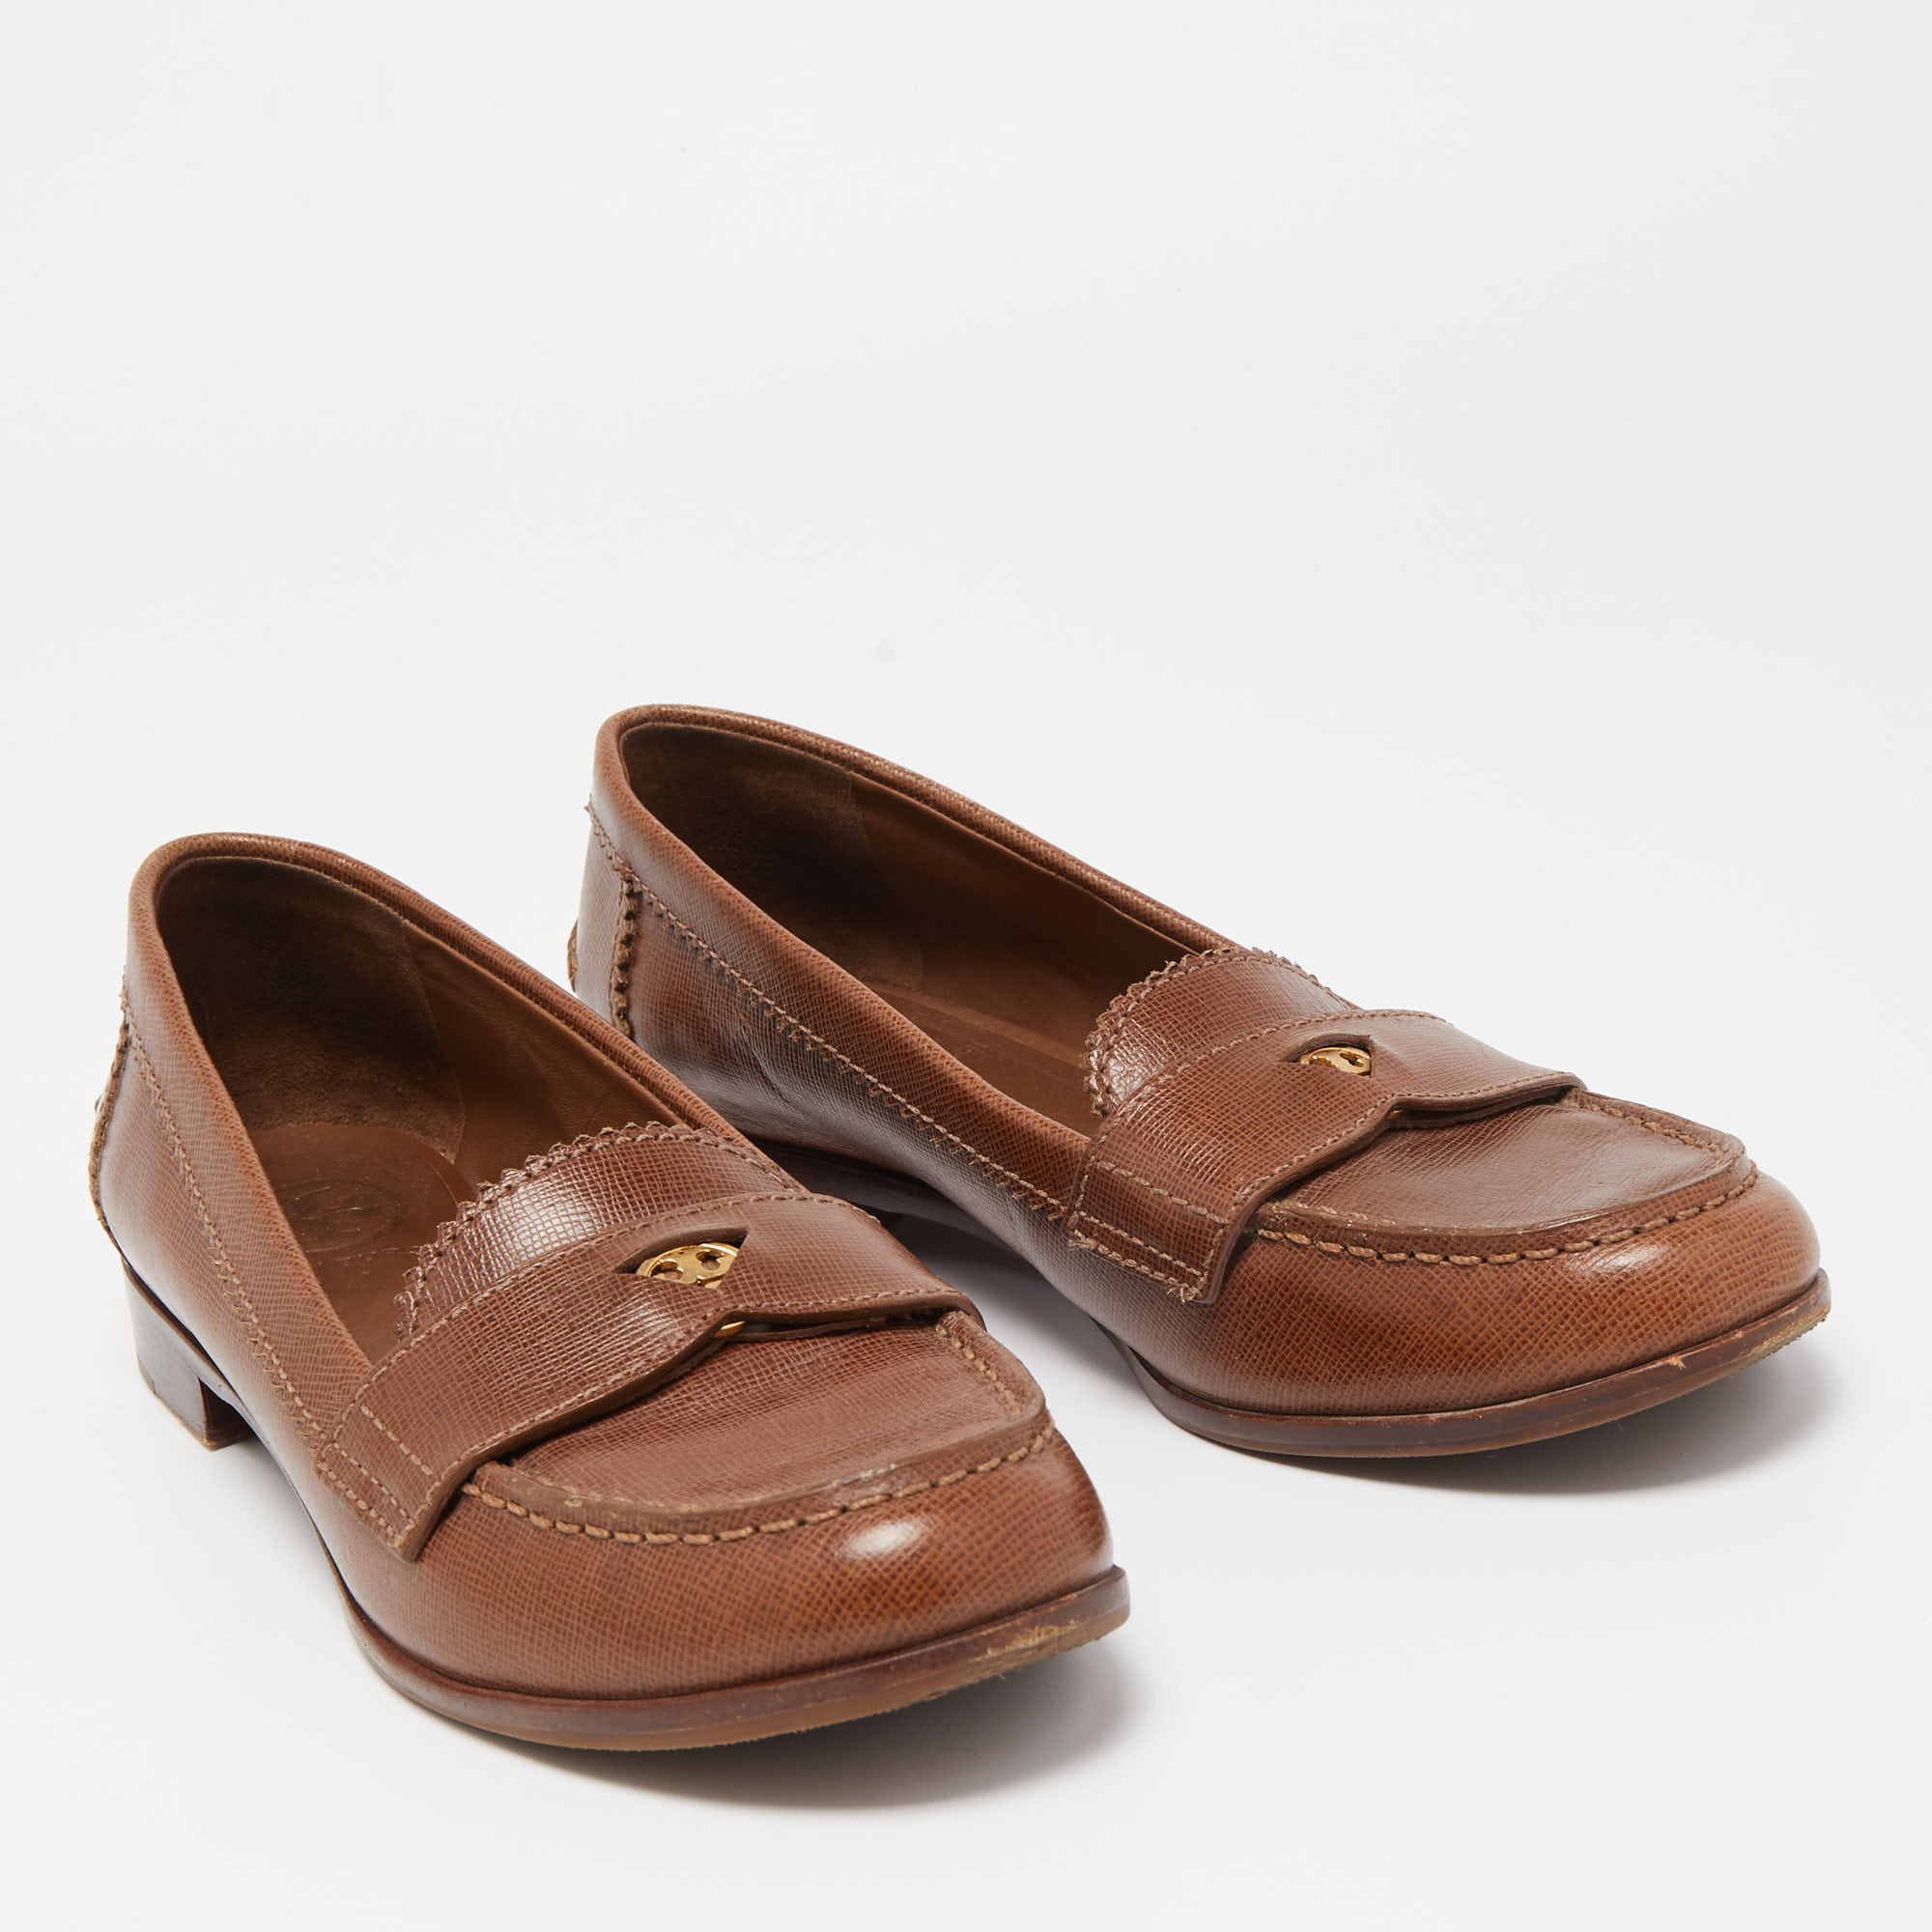 Tory Burch Brown Leather Penny Loafers Size 38.5